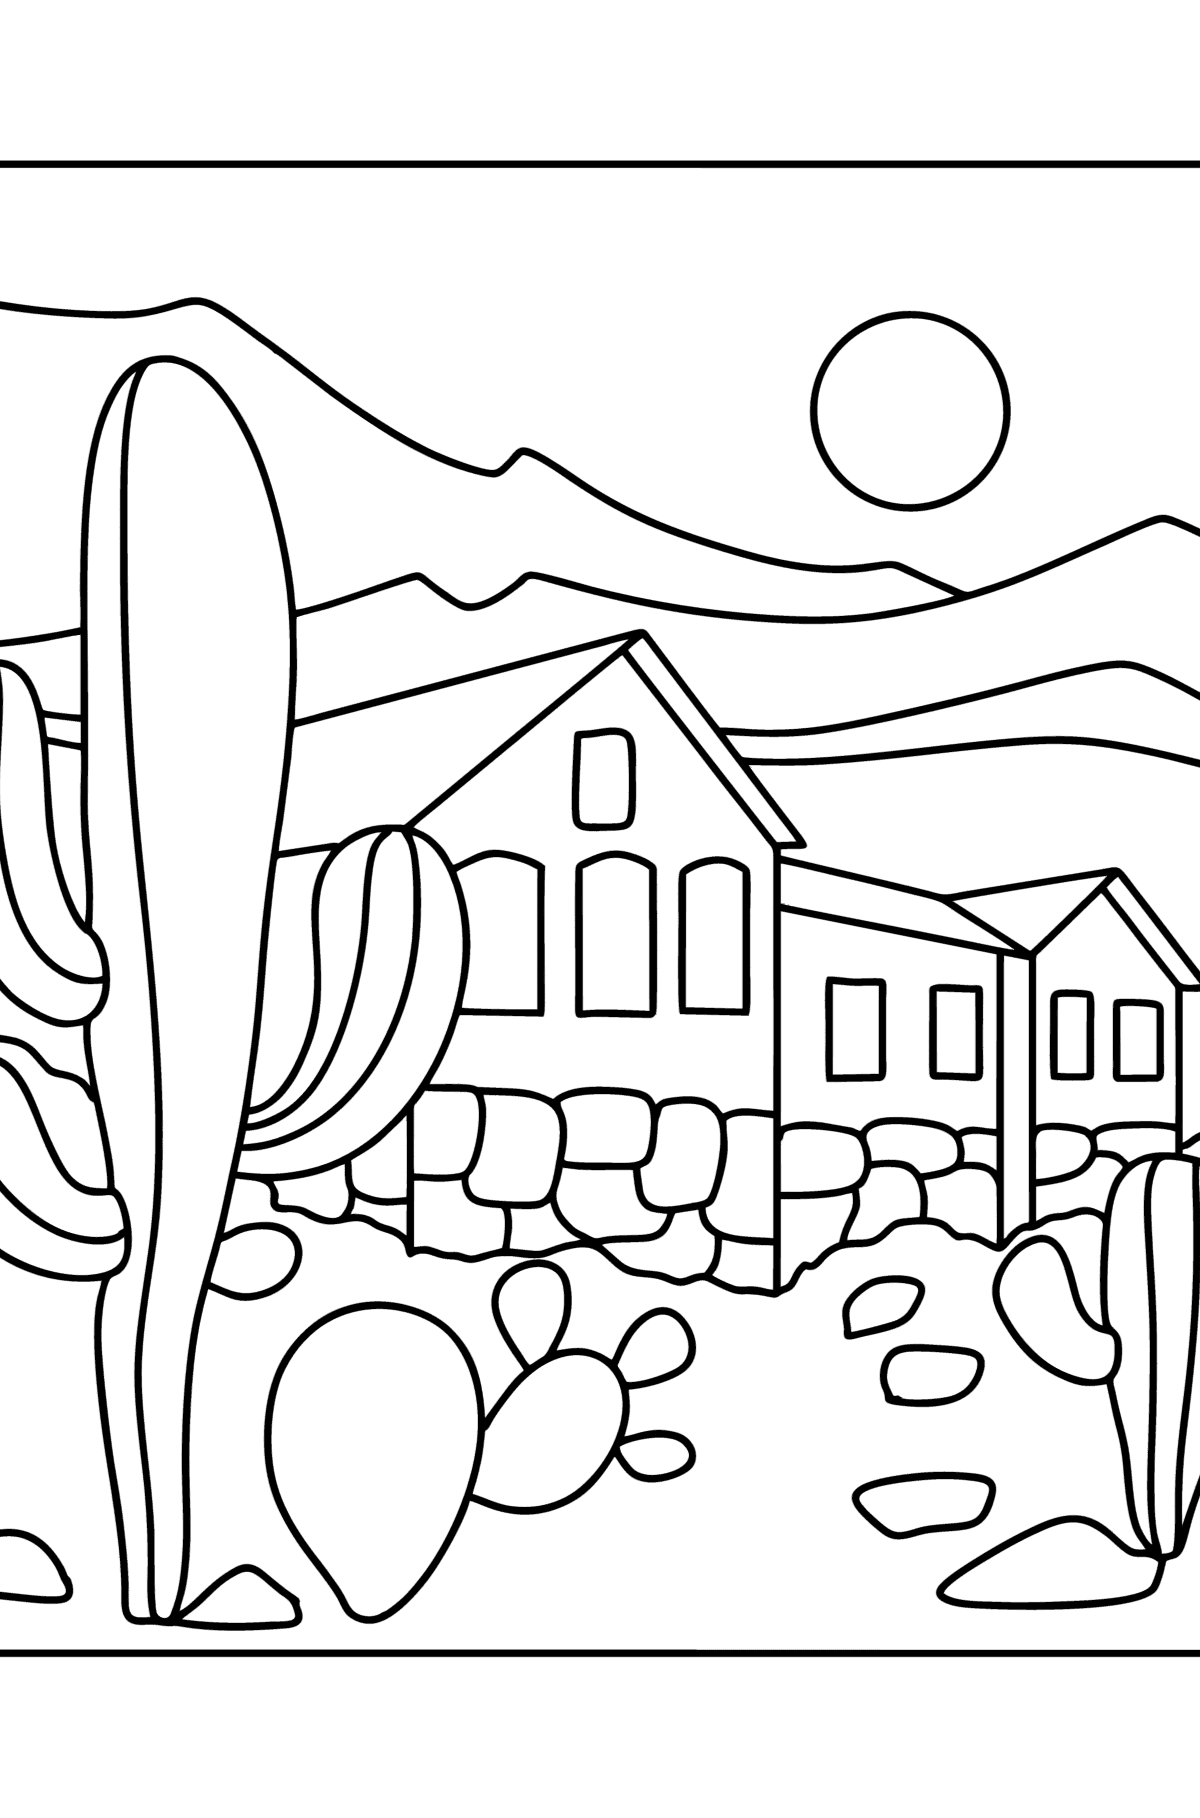 Cottage in the desert coloring page - Coloring Pages for Kids